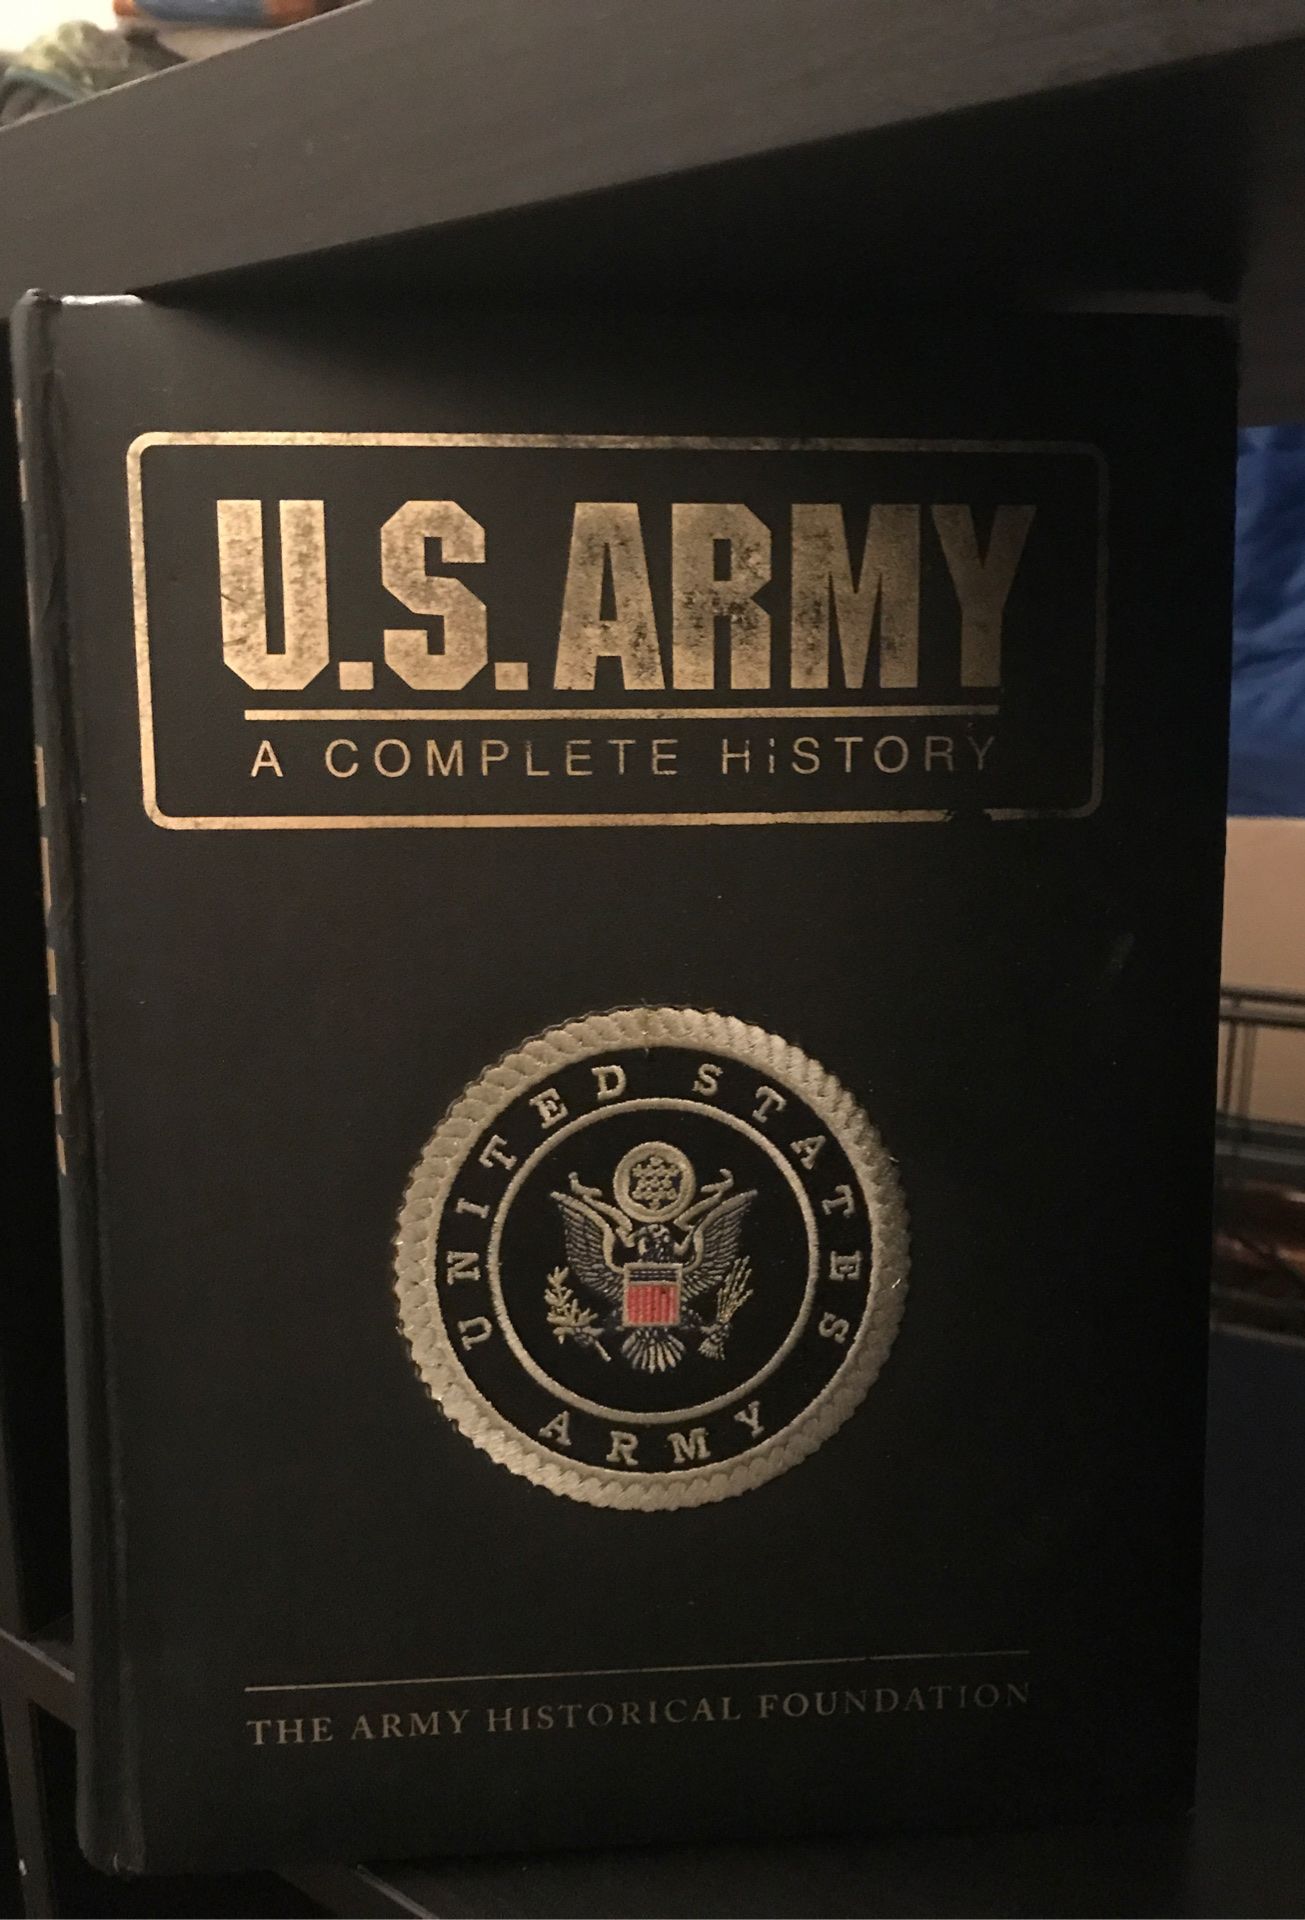 ARMY HISTORY BOOK